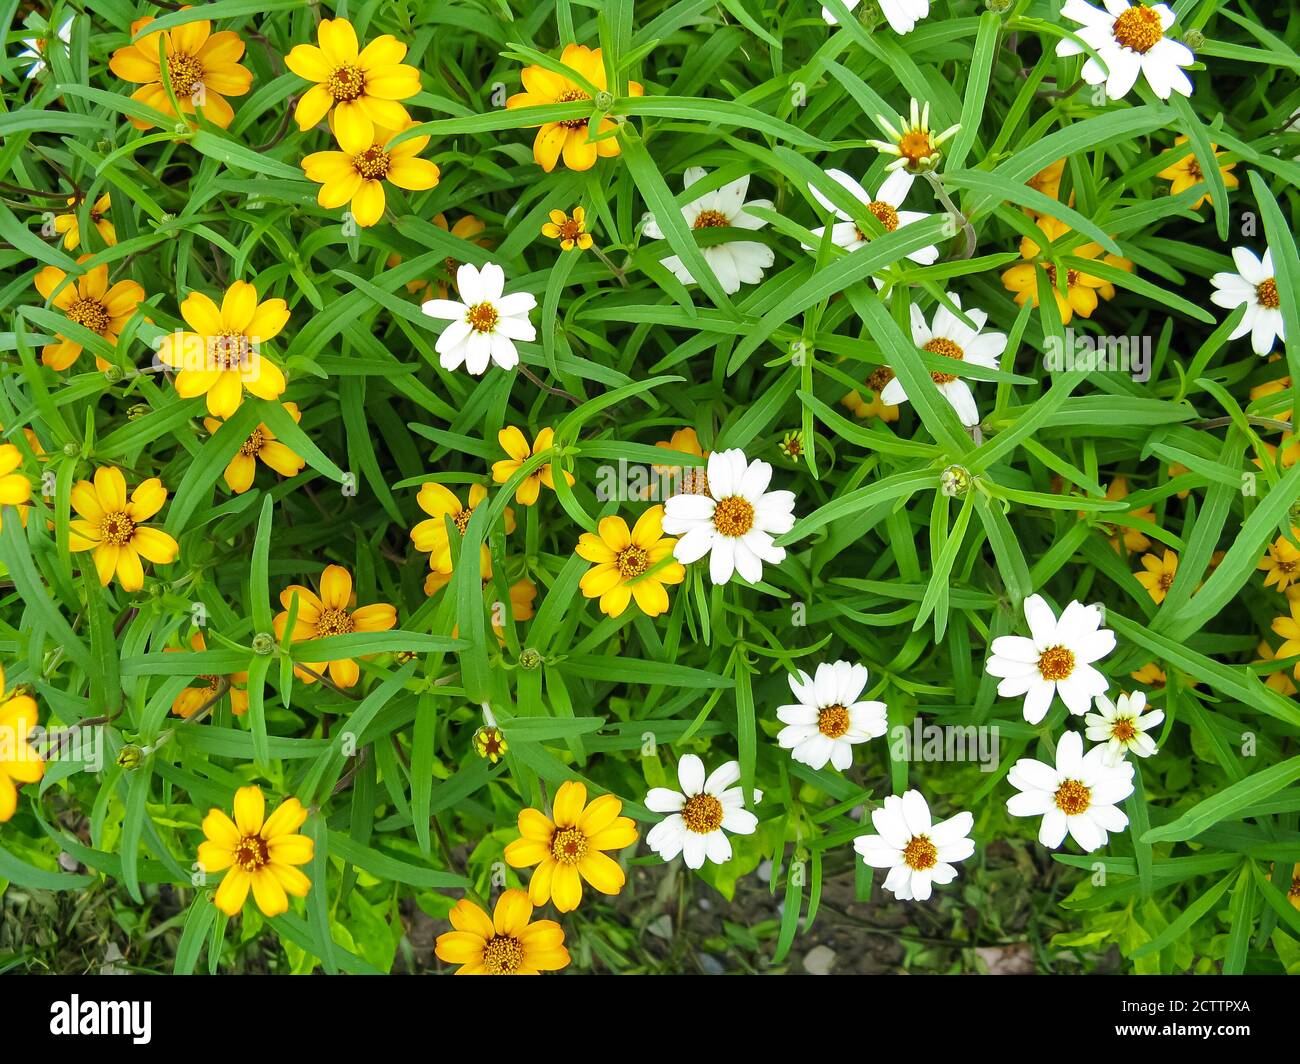 Image of Colorful white and yellow flowers blooming in a garden with green leaves all around Stock Photo